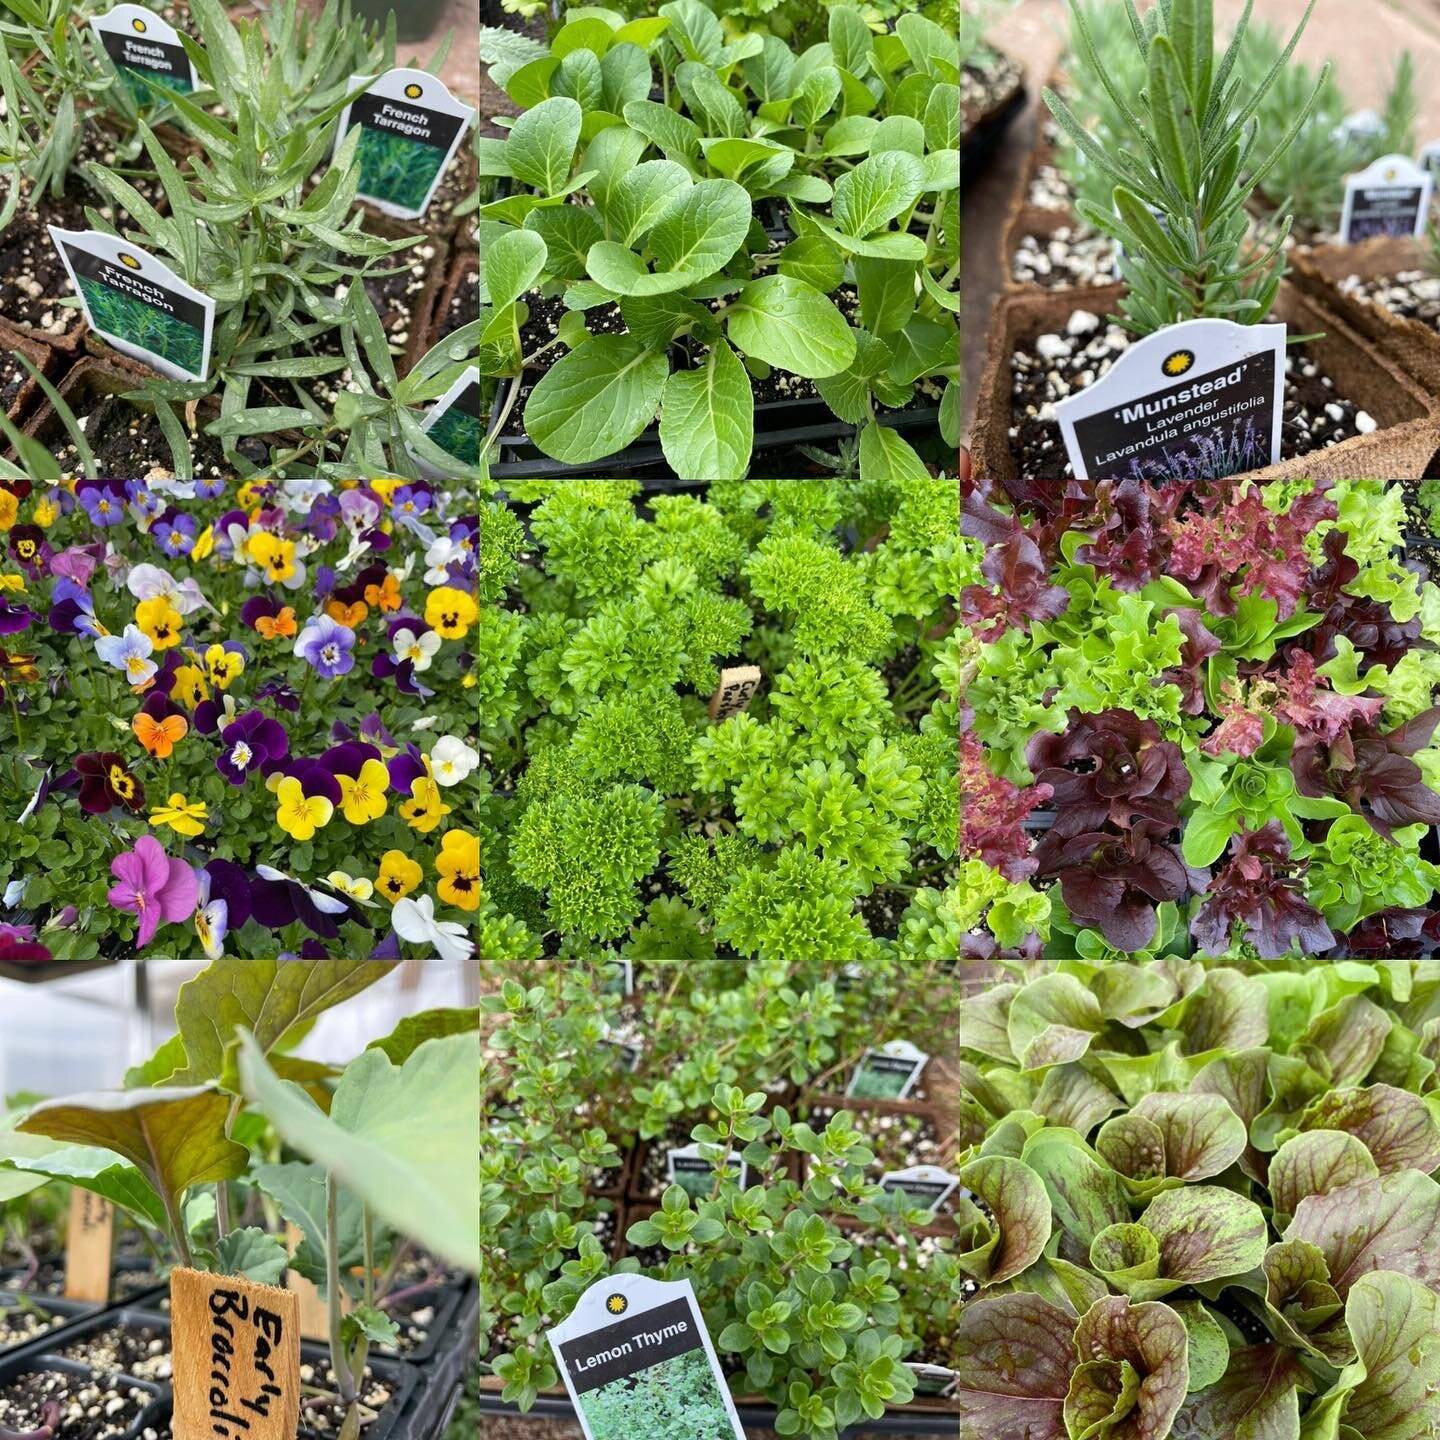 Have you got garden fever yet?? We&rsquo;ve got you covered for May planting. Lots of hardy veggies, herbs and flowers ready to go out! @antigonishfarmersmarket tomorrow **summer hours 8:30-1:00**